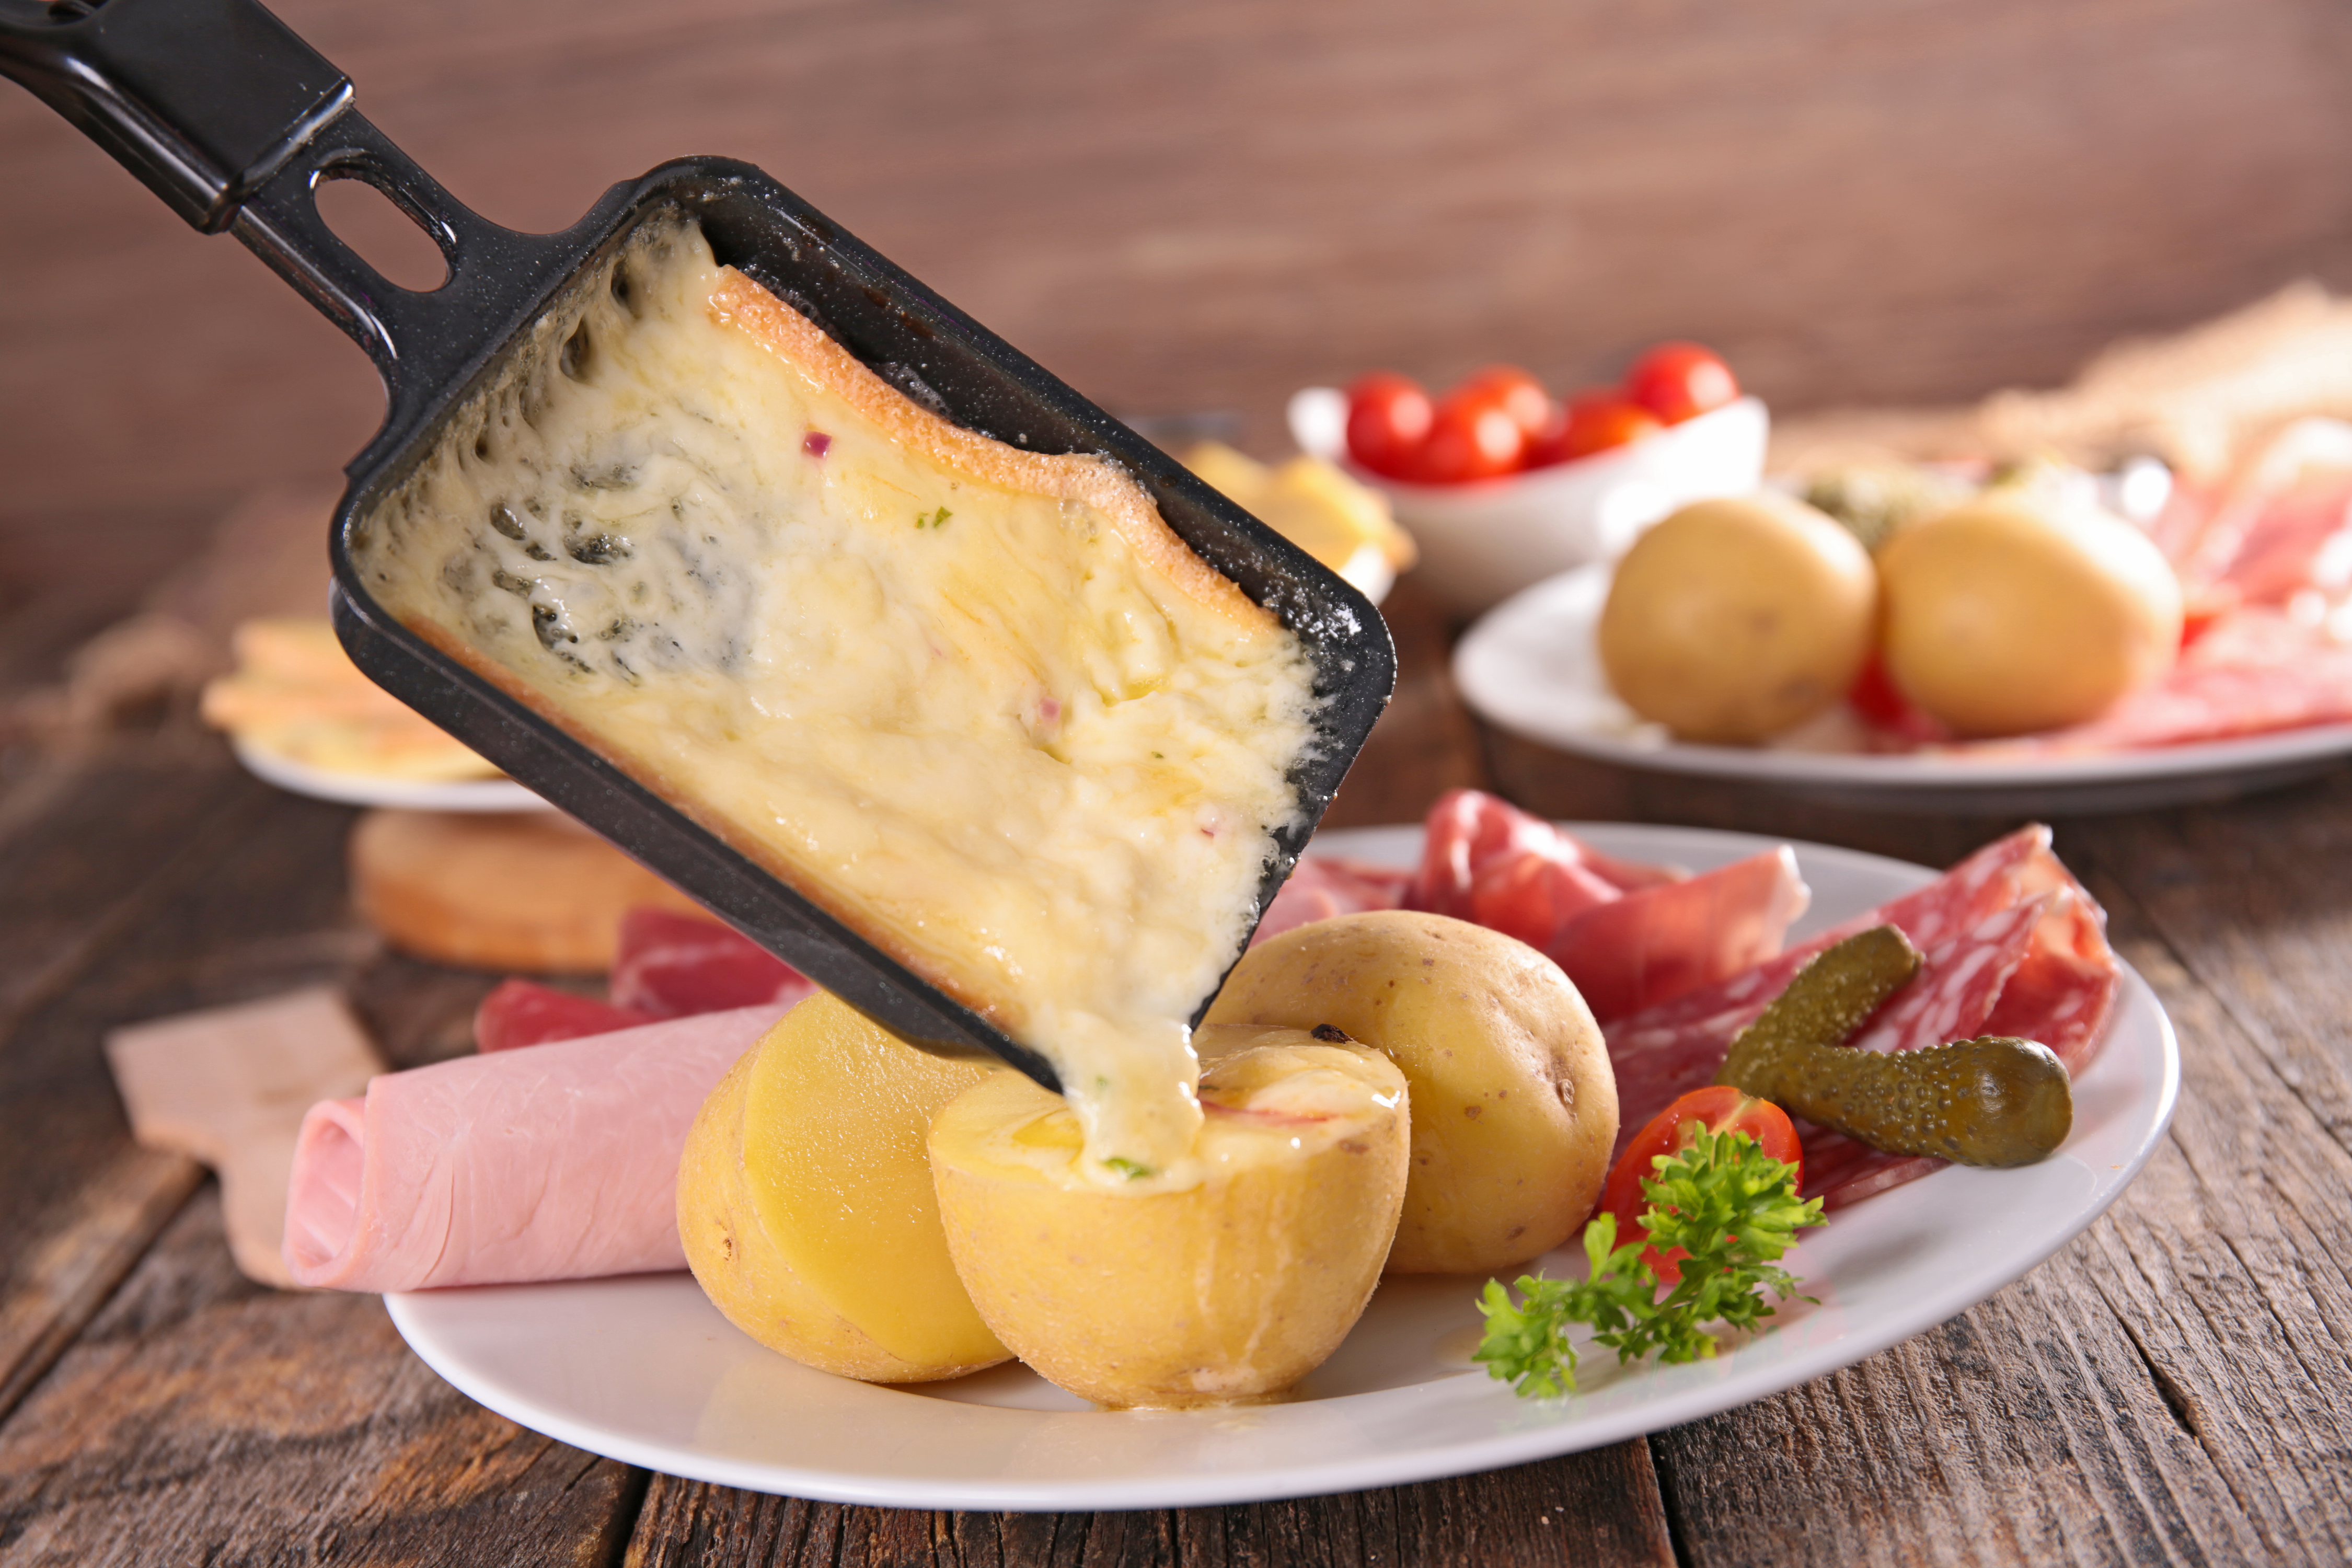 A Taste of Tradition: Raclette Cheese Finds a Home in Wisconsin